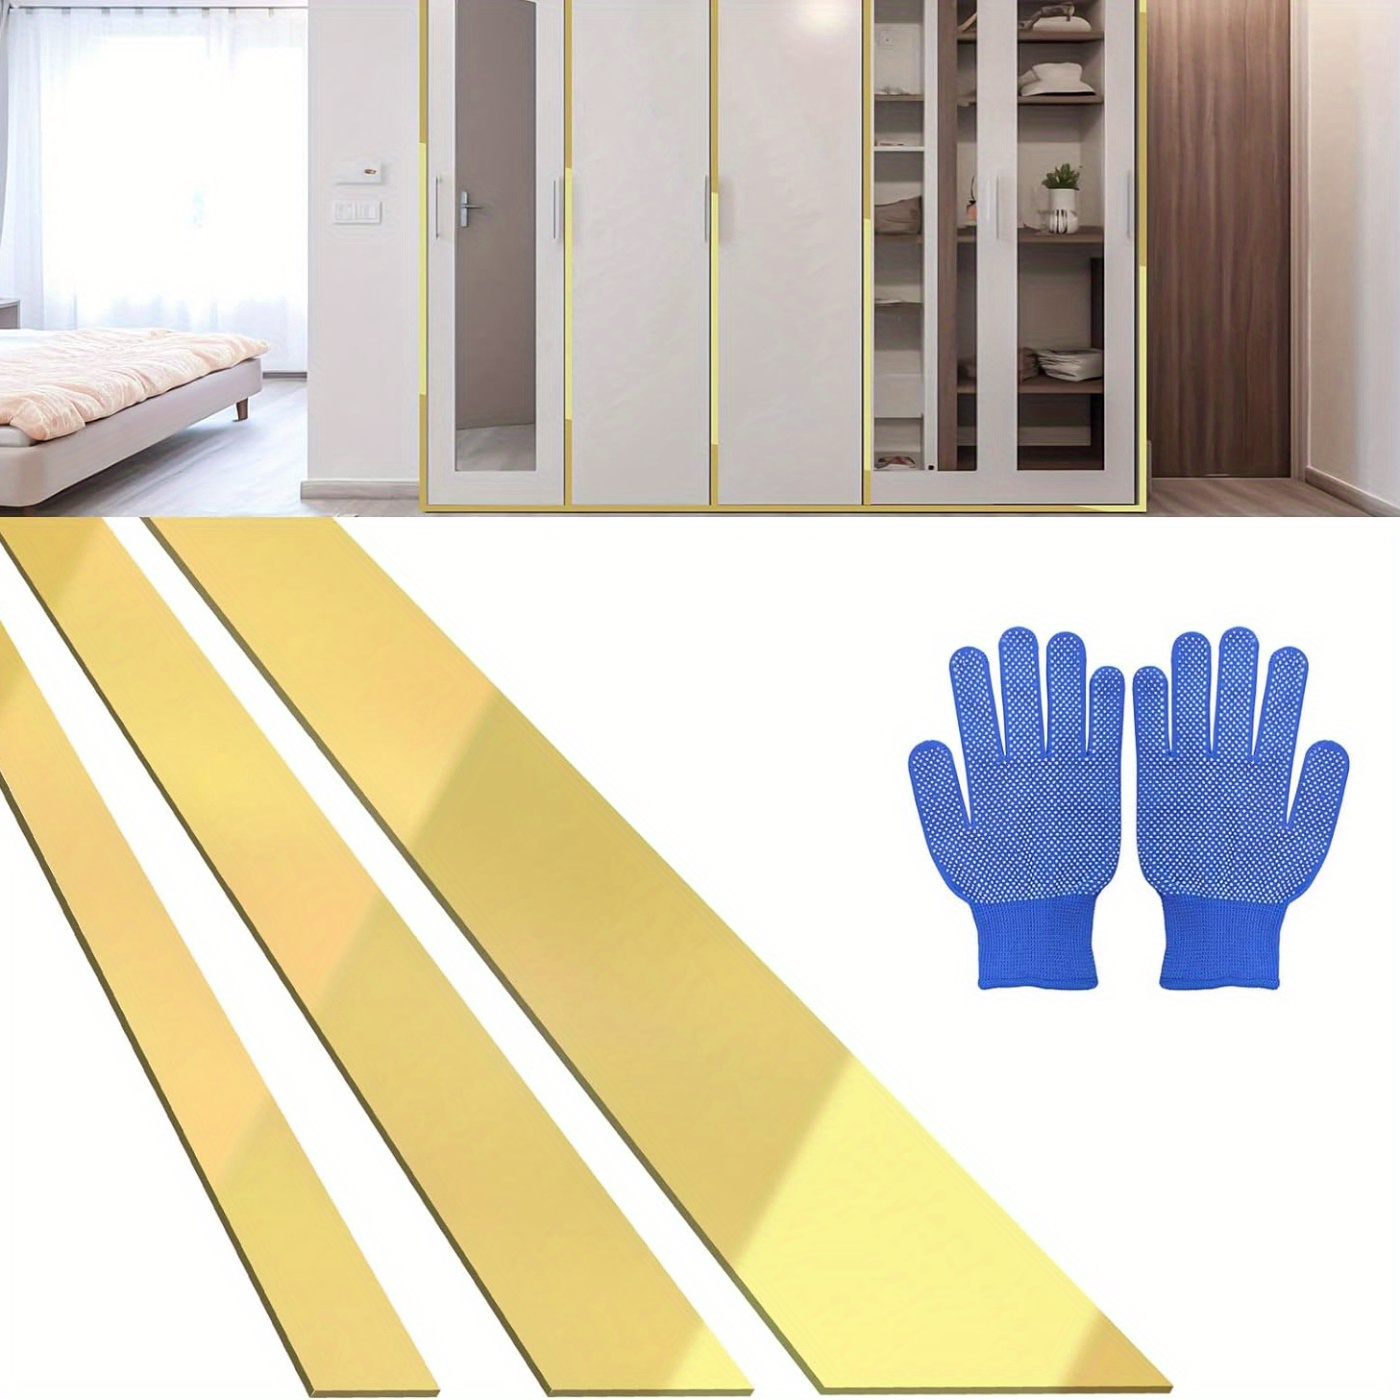 

Gold Metalized Wall Trim Molding 201 Stainless Steel Self Adhesive 16.4ft Peel And Stick Wall Trim Metalized Mirror-like Finish For Mirror Frame, Wall, Fireplace And Home Diy Decoration